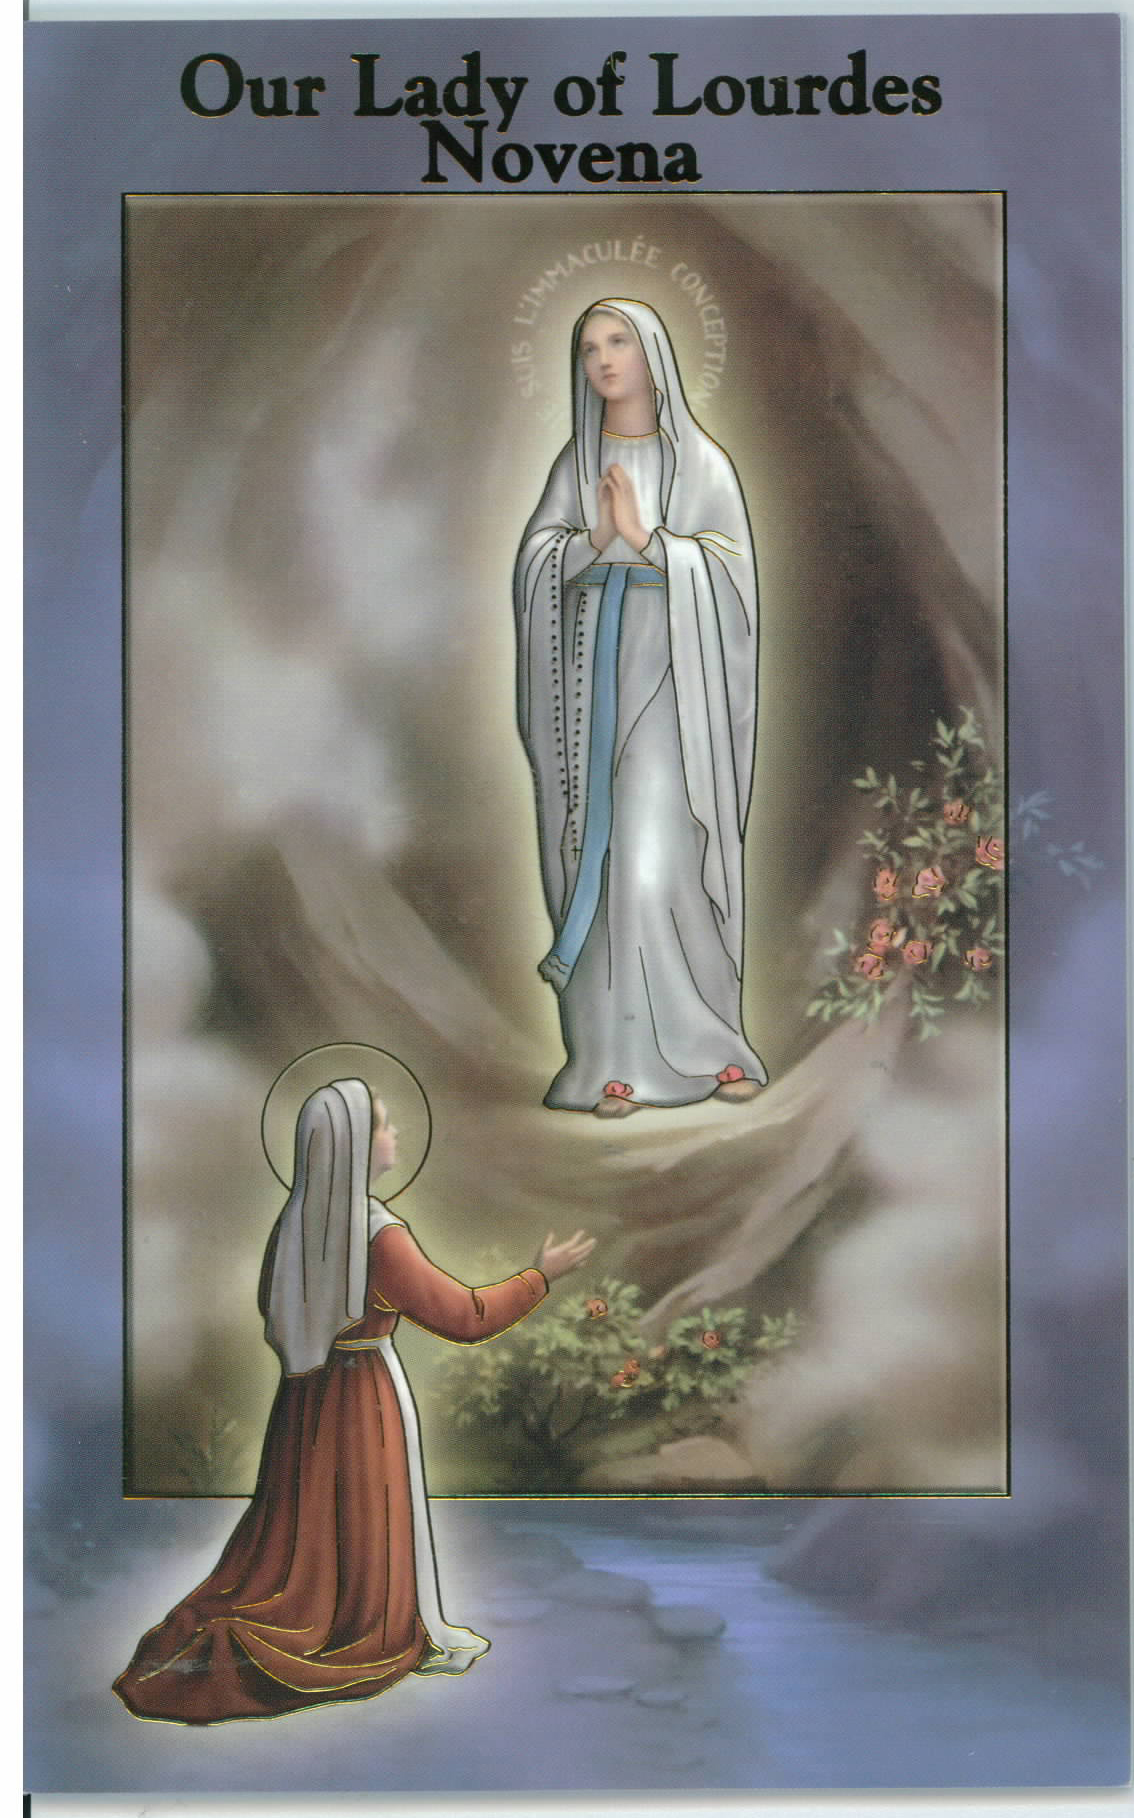 Our Lady of Lourdes Novena Prayer Book with Prayers 12-2432-252 is 3.75" x 5-7/8" and 24 Pages beautifully illustrated with Italian Fratelli-Bonella Artwork and original text by Daniel A. Lord, S.J.